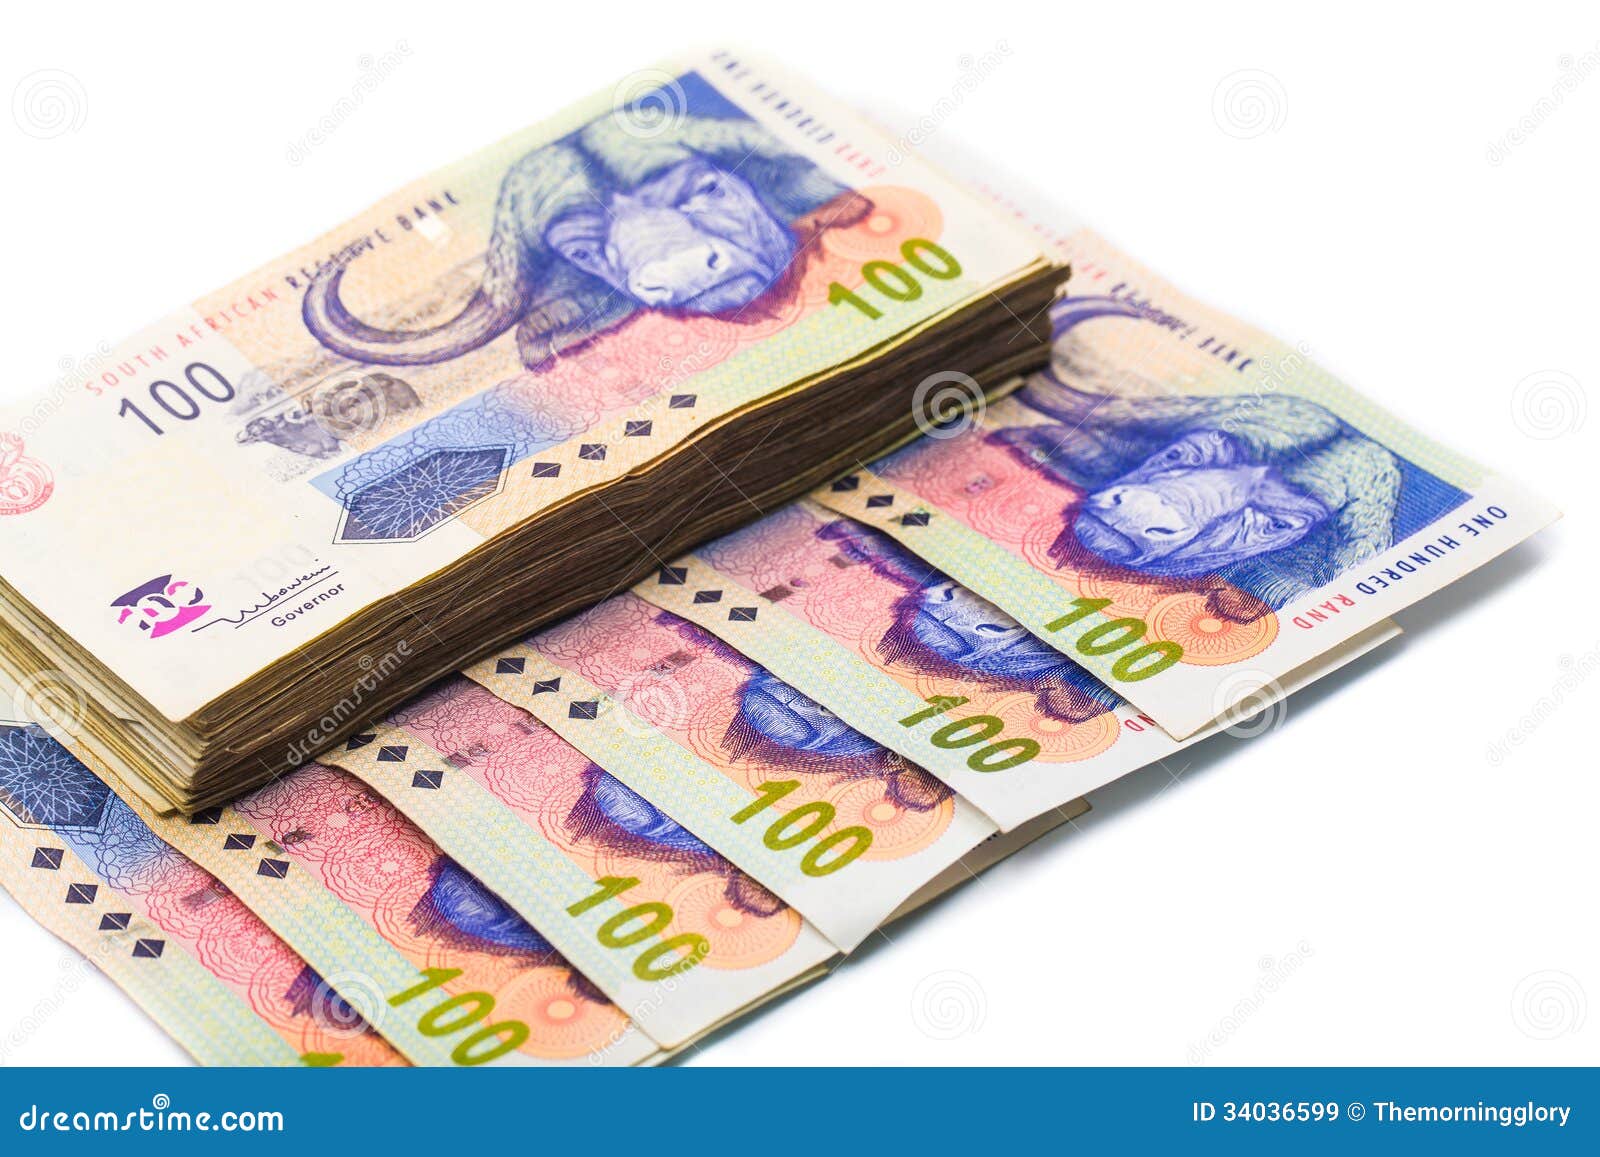 New South African 100 Rand Notes Royalty Free Stock Images - Image ...